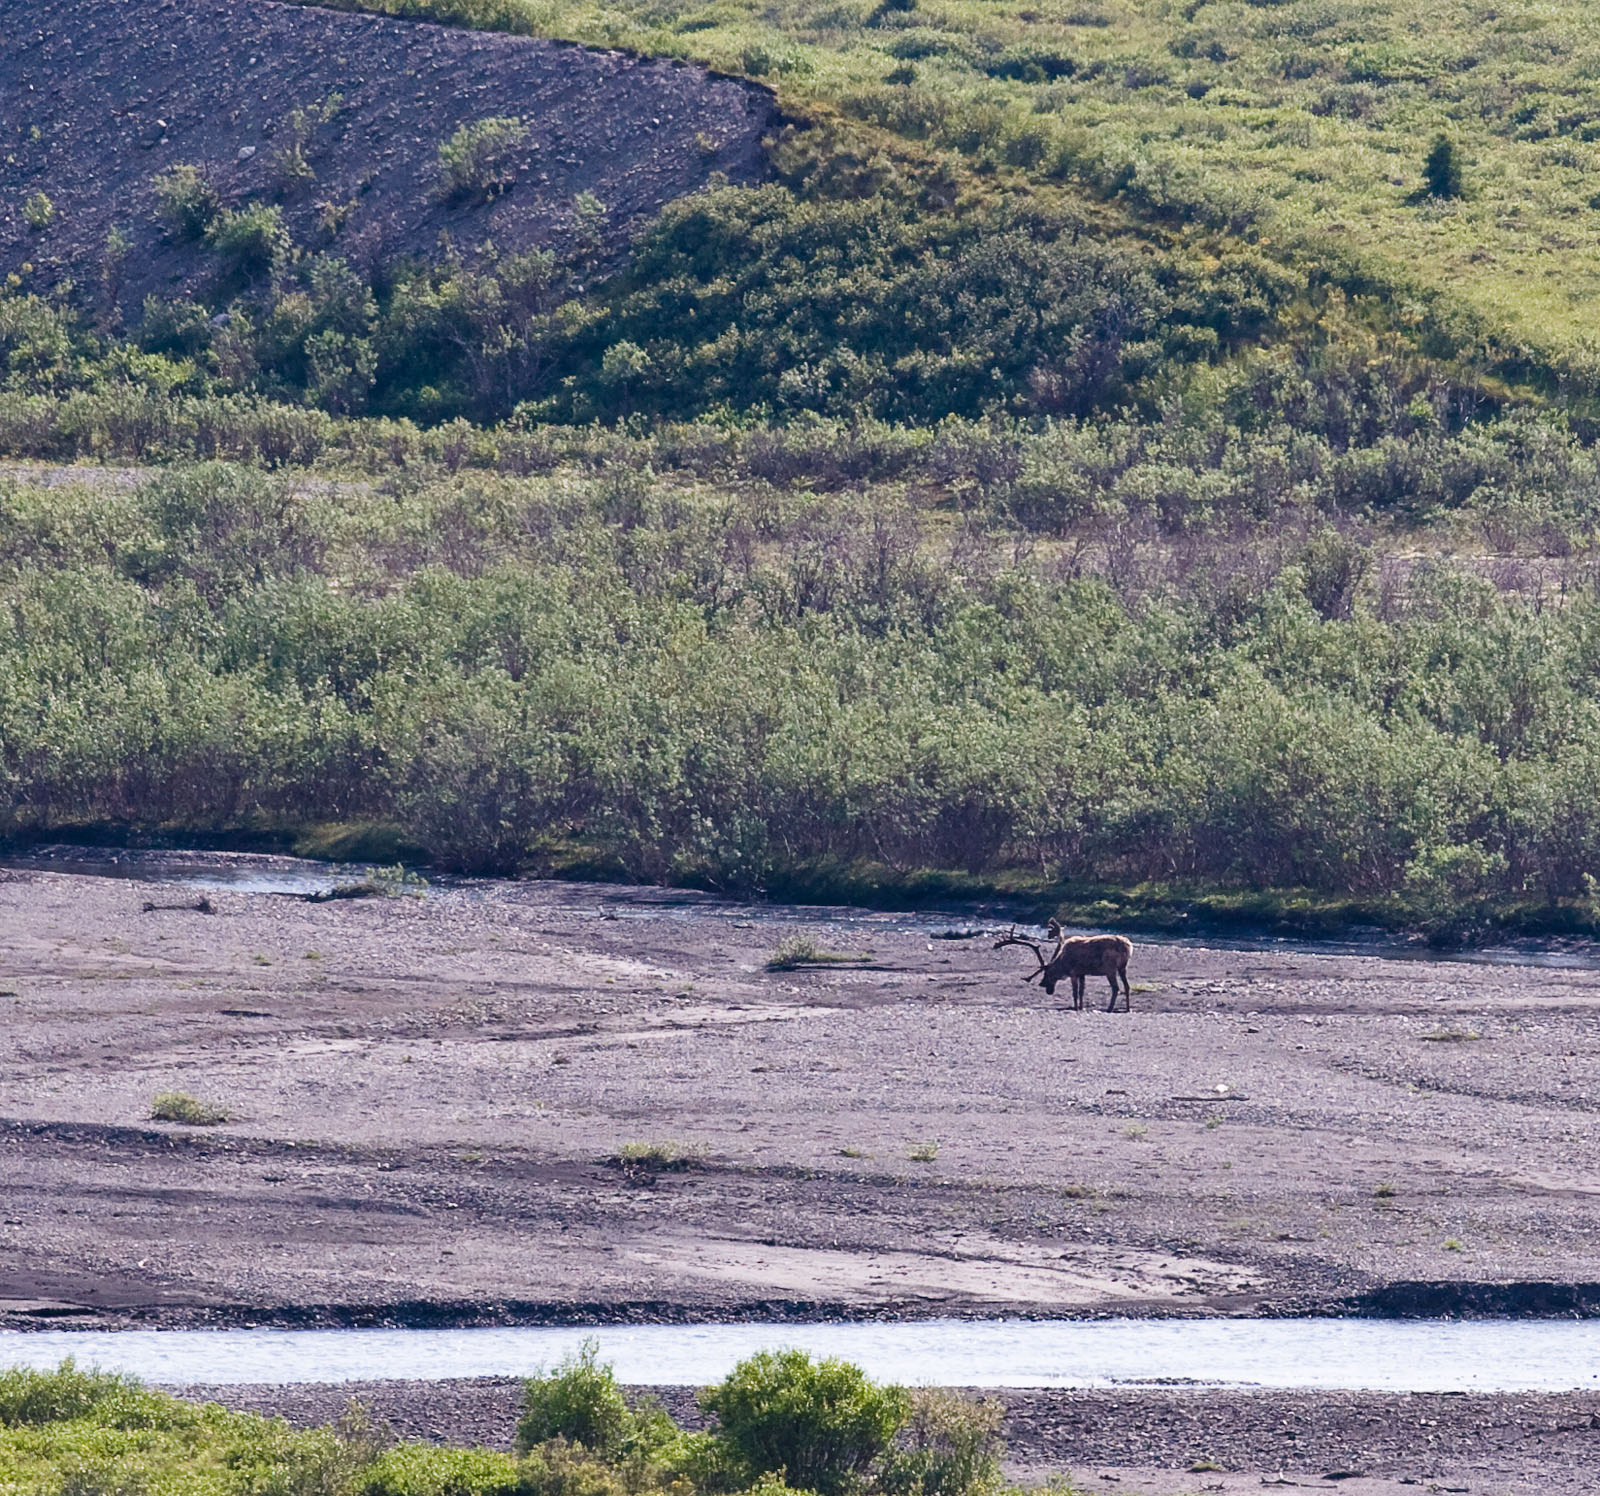 A large caribou walks through the bed of a glacial river in Denali National Park. From Denali National Park in Alaska.